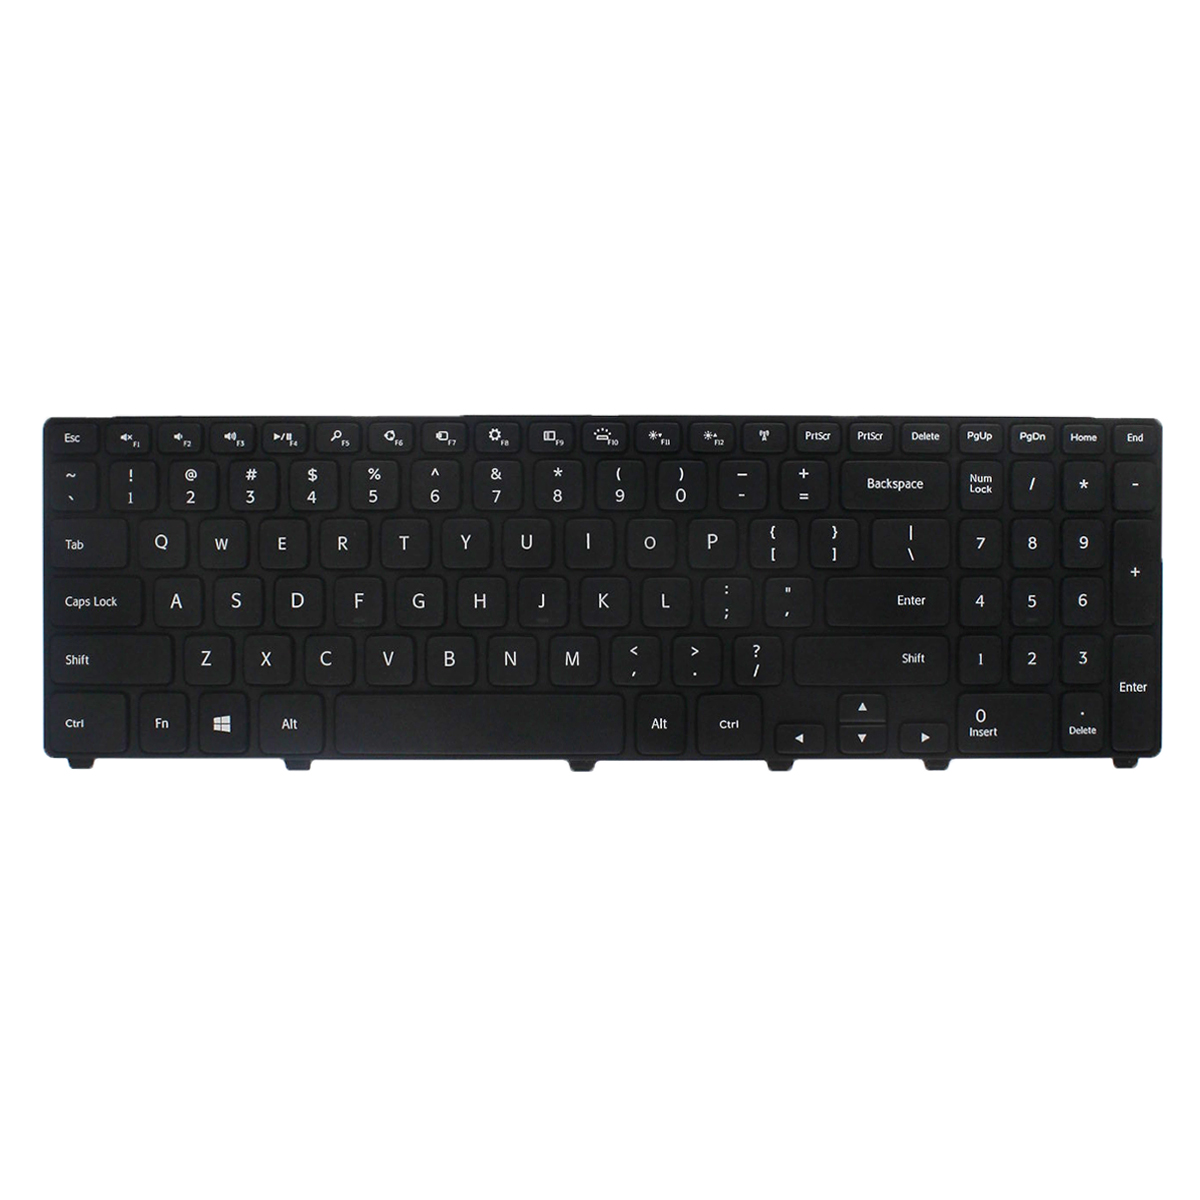 New Keyboard for Dell Inspiron 17 7000 Series 7737 7746 Laptop